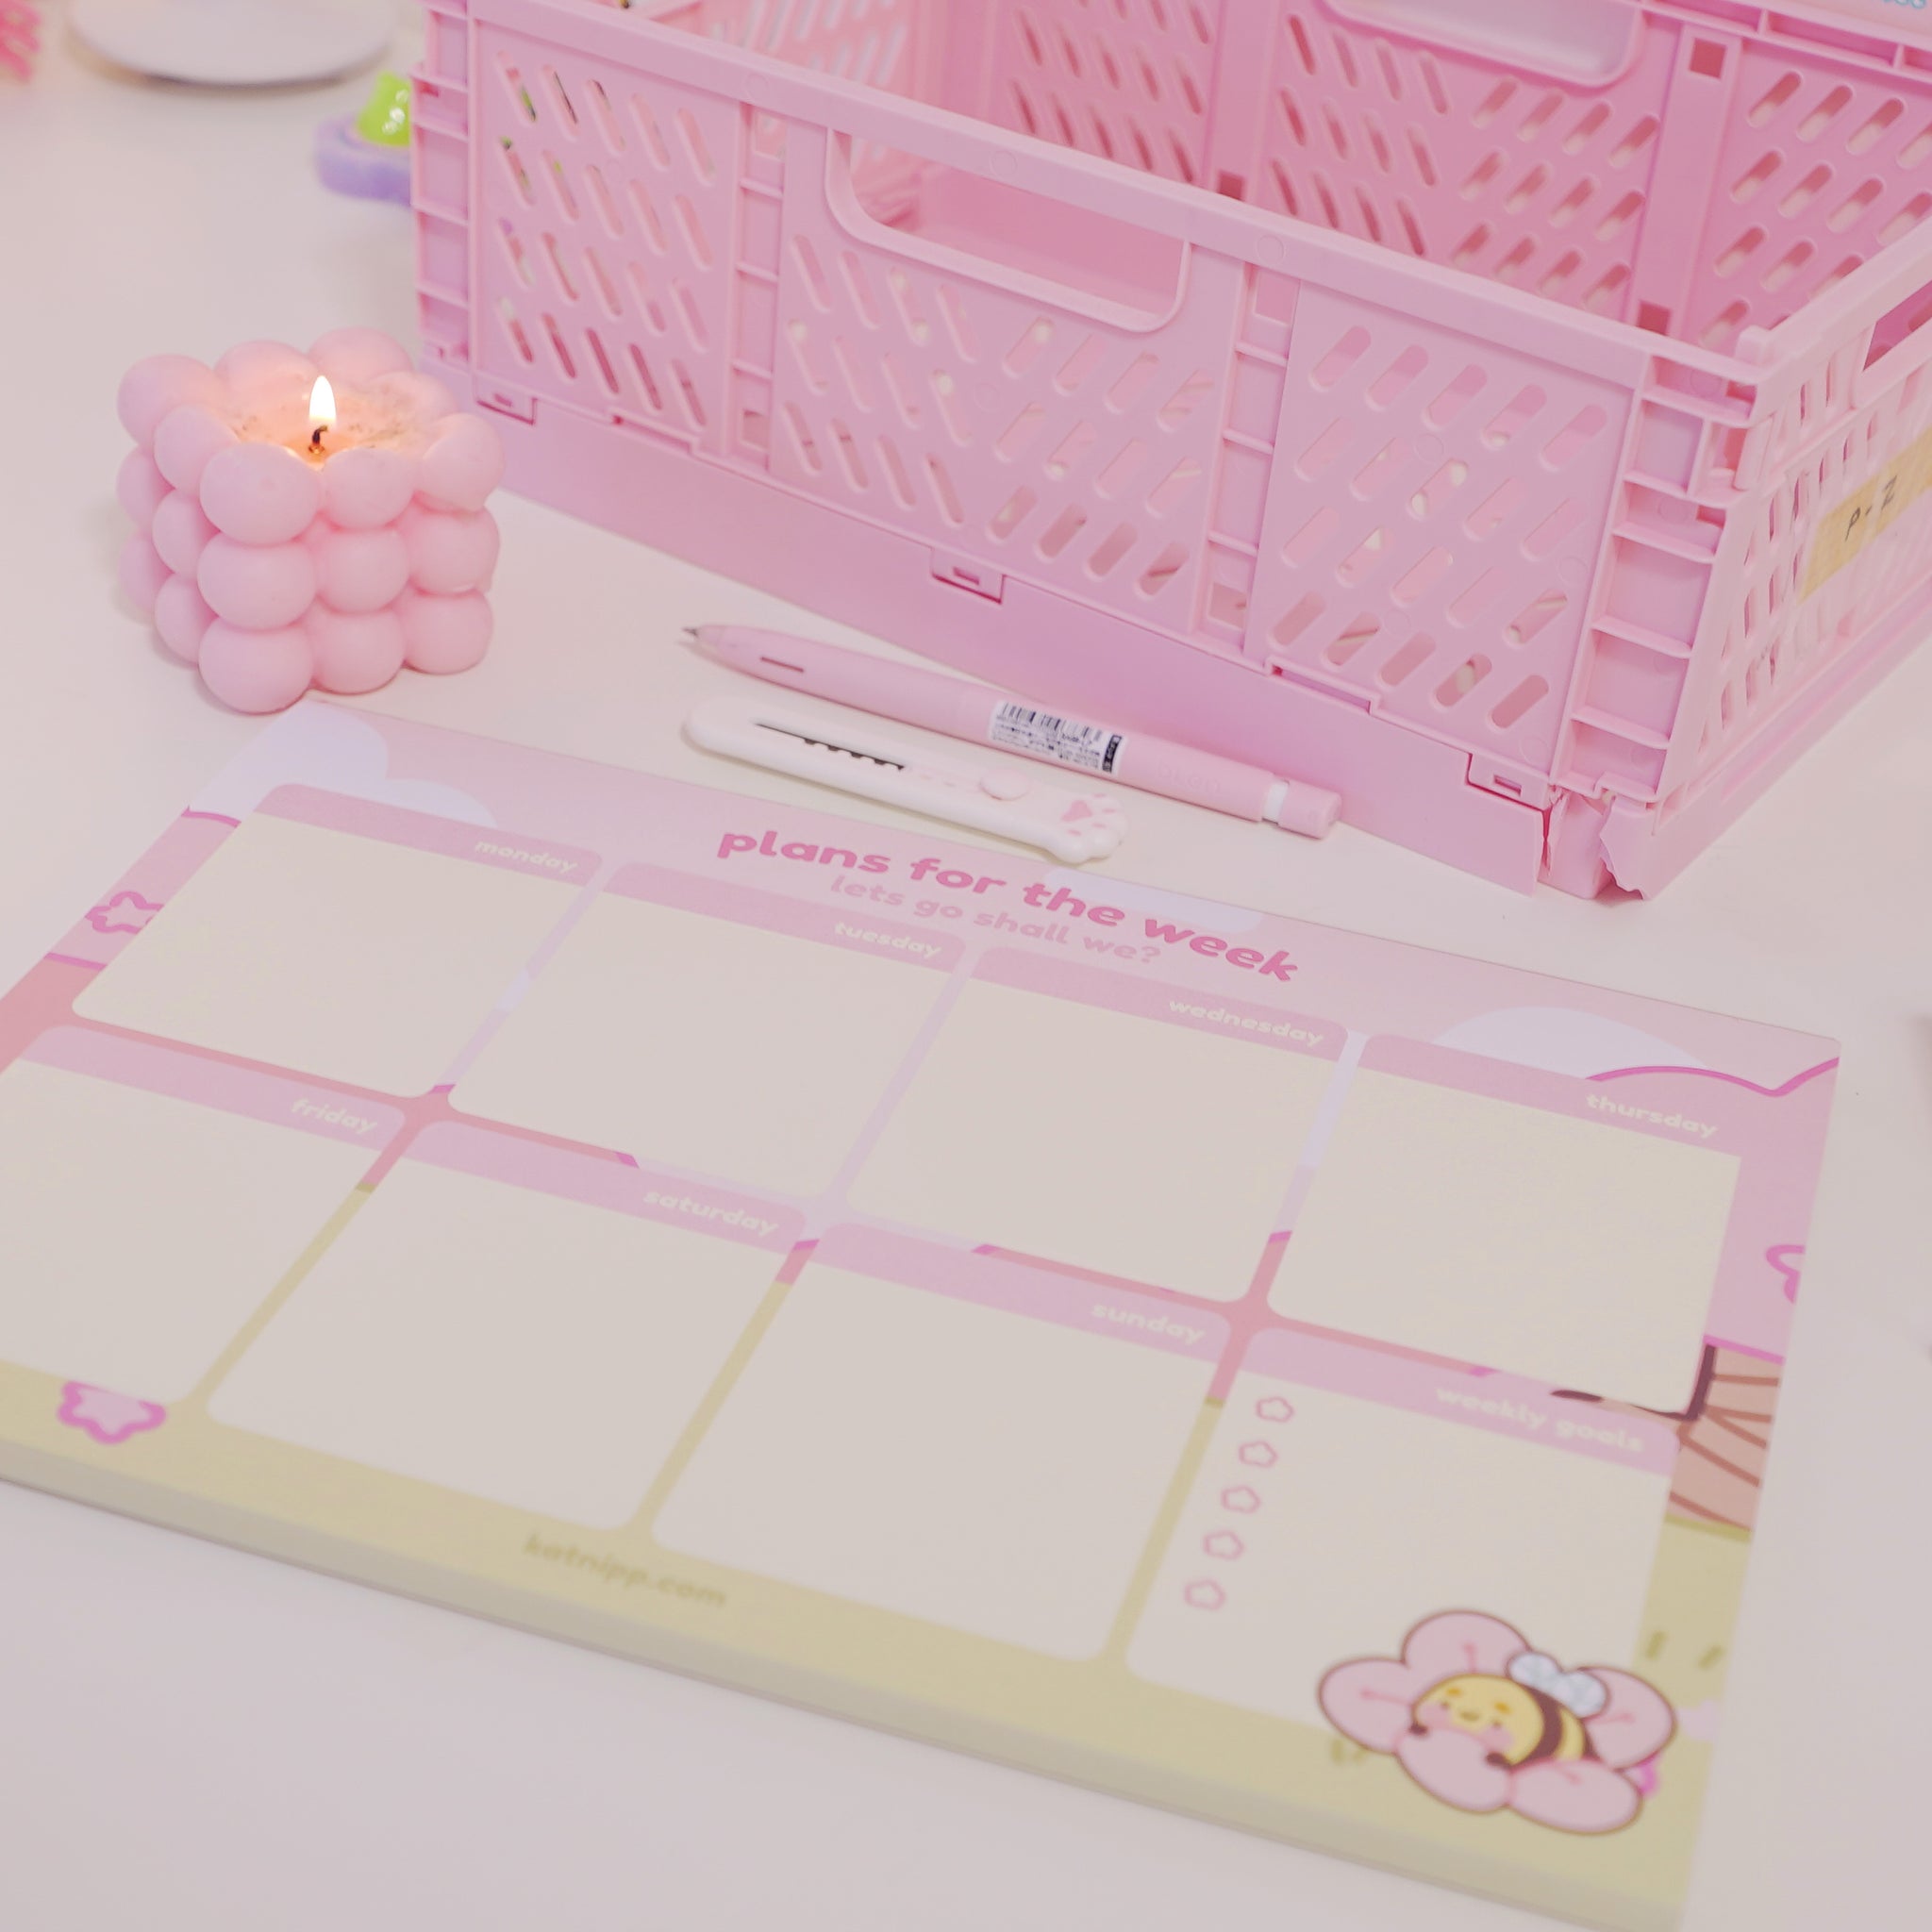 A4 Sakura-inspired desktop planner featuring Bumblebutt the Bumblebee charm and cherry blossom illustrations. Perfect for weekly planning, candle